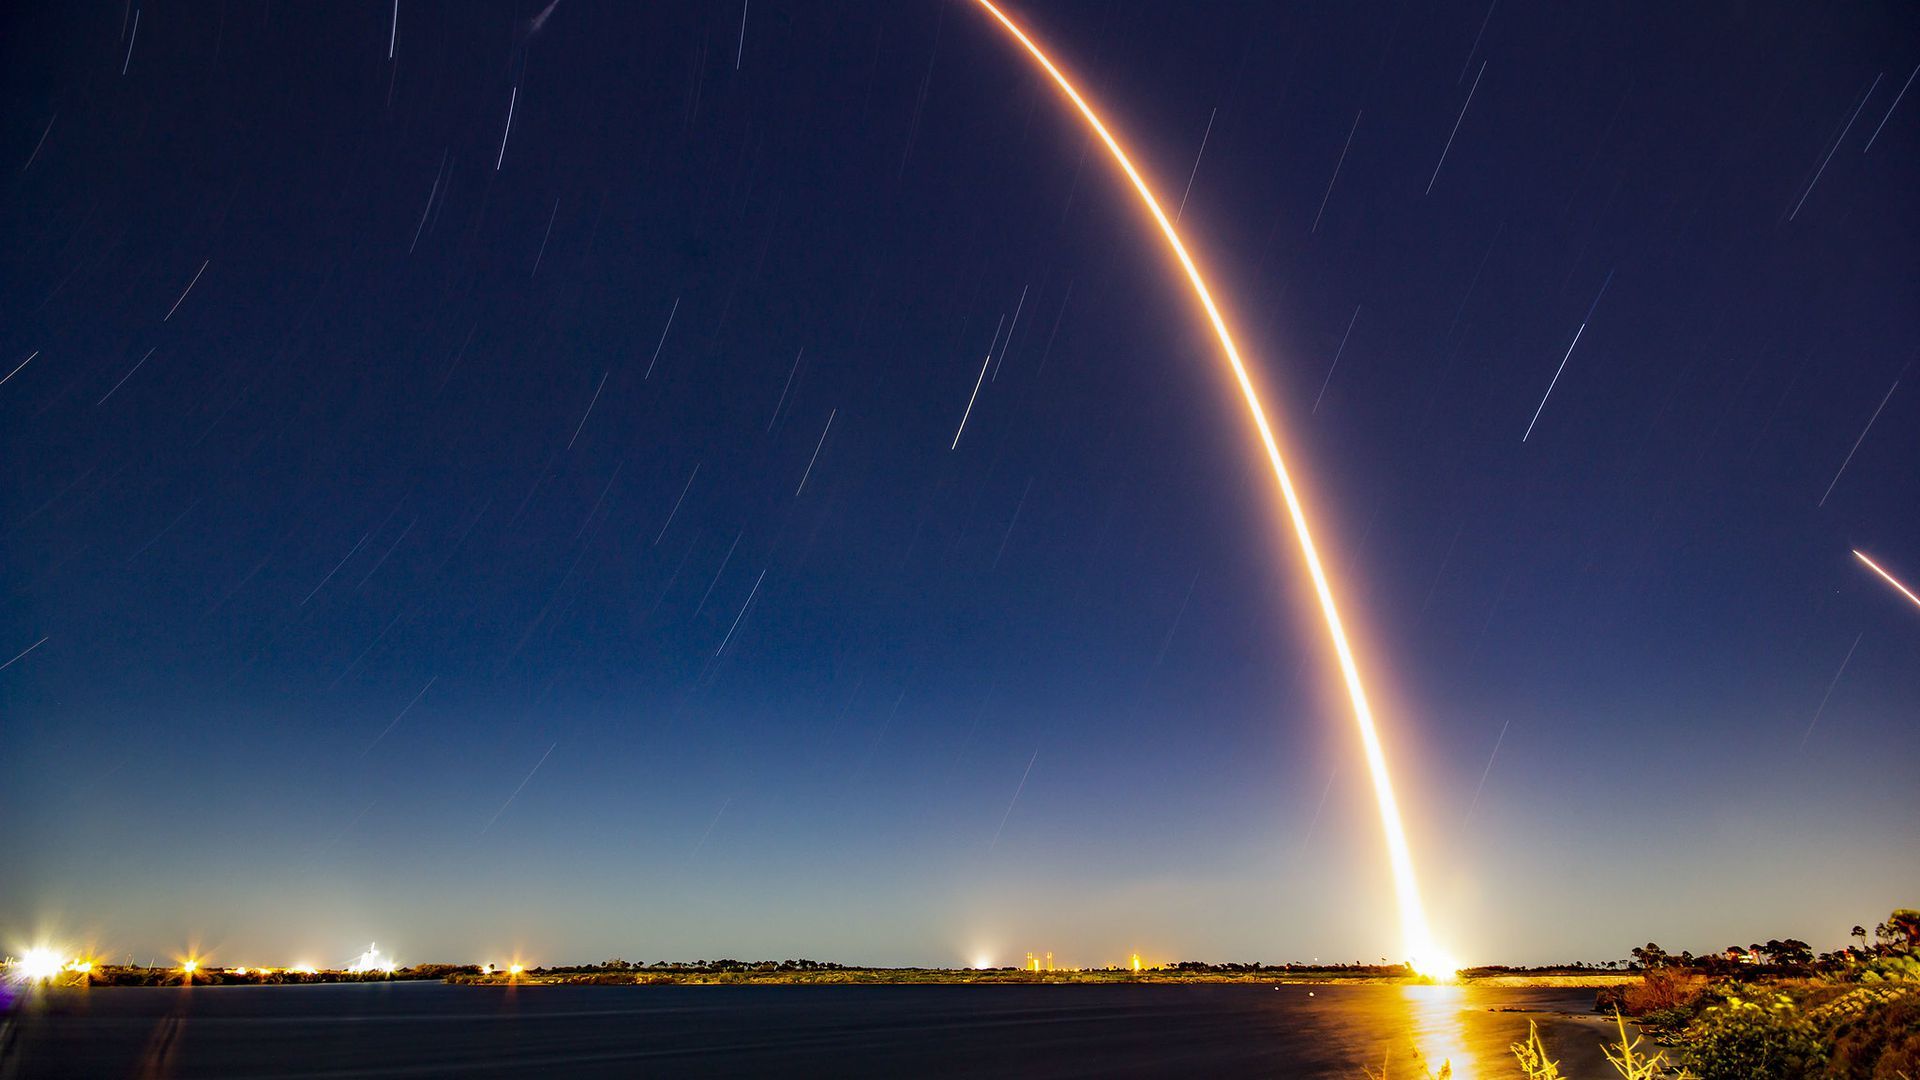 A SpaceX rocket launch timelapse